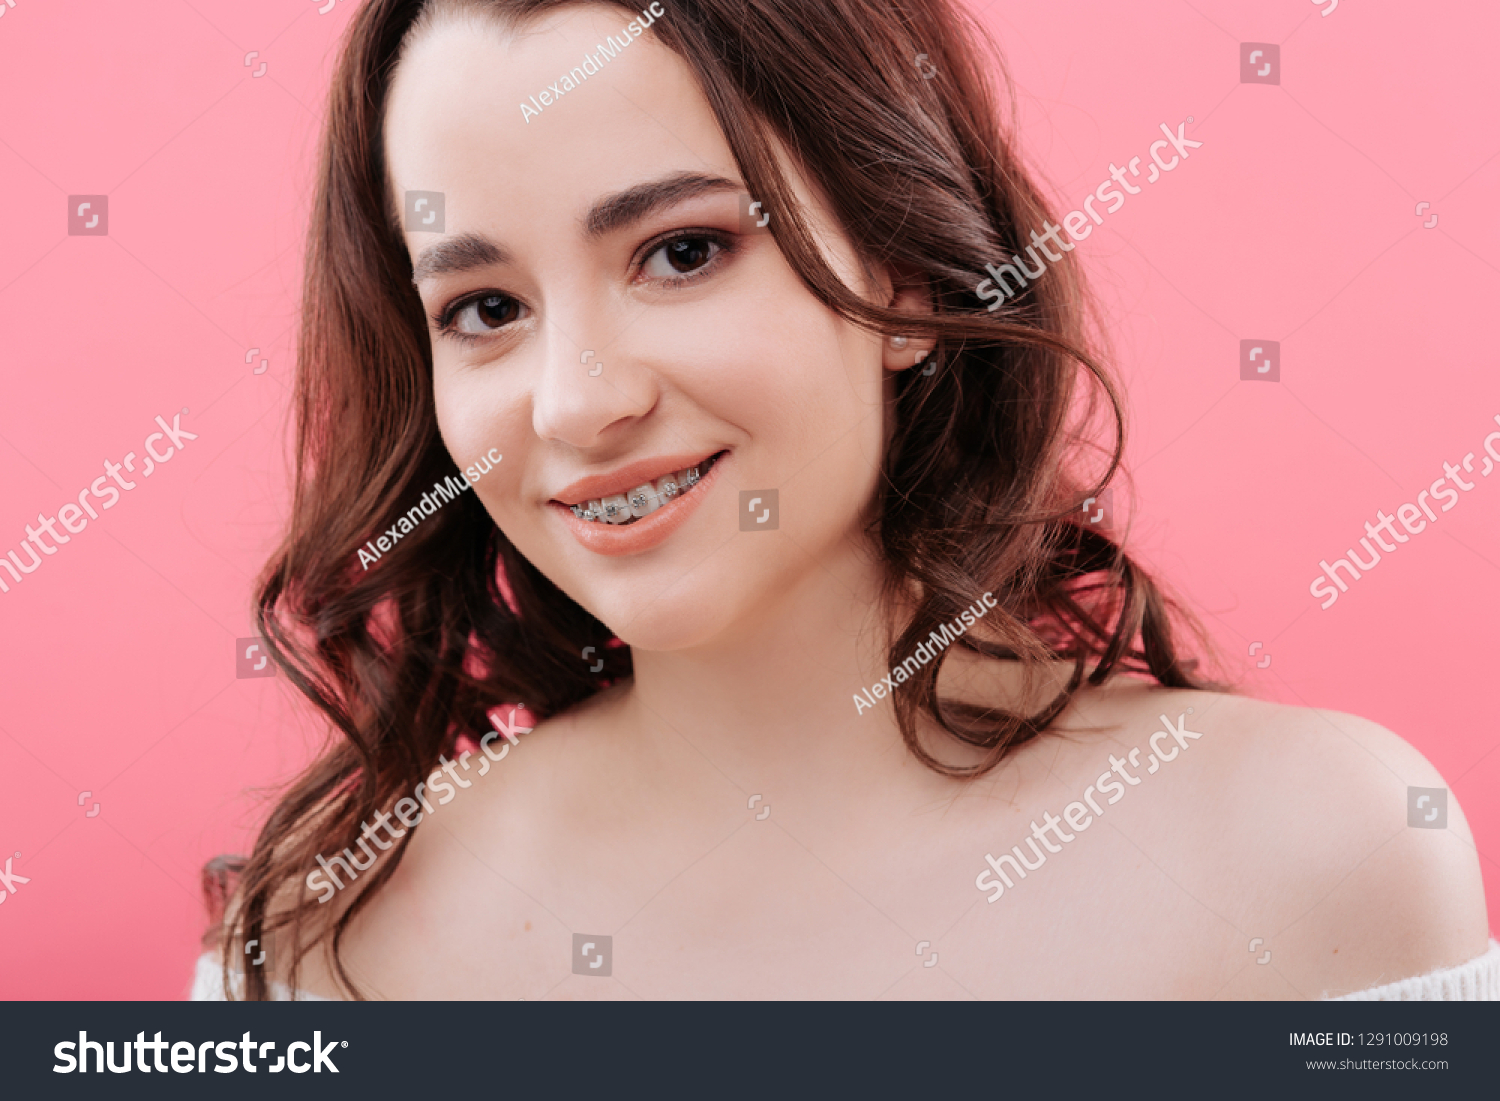 Girl With Braces Naked